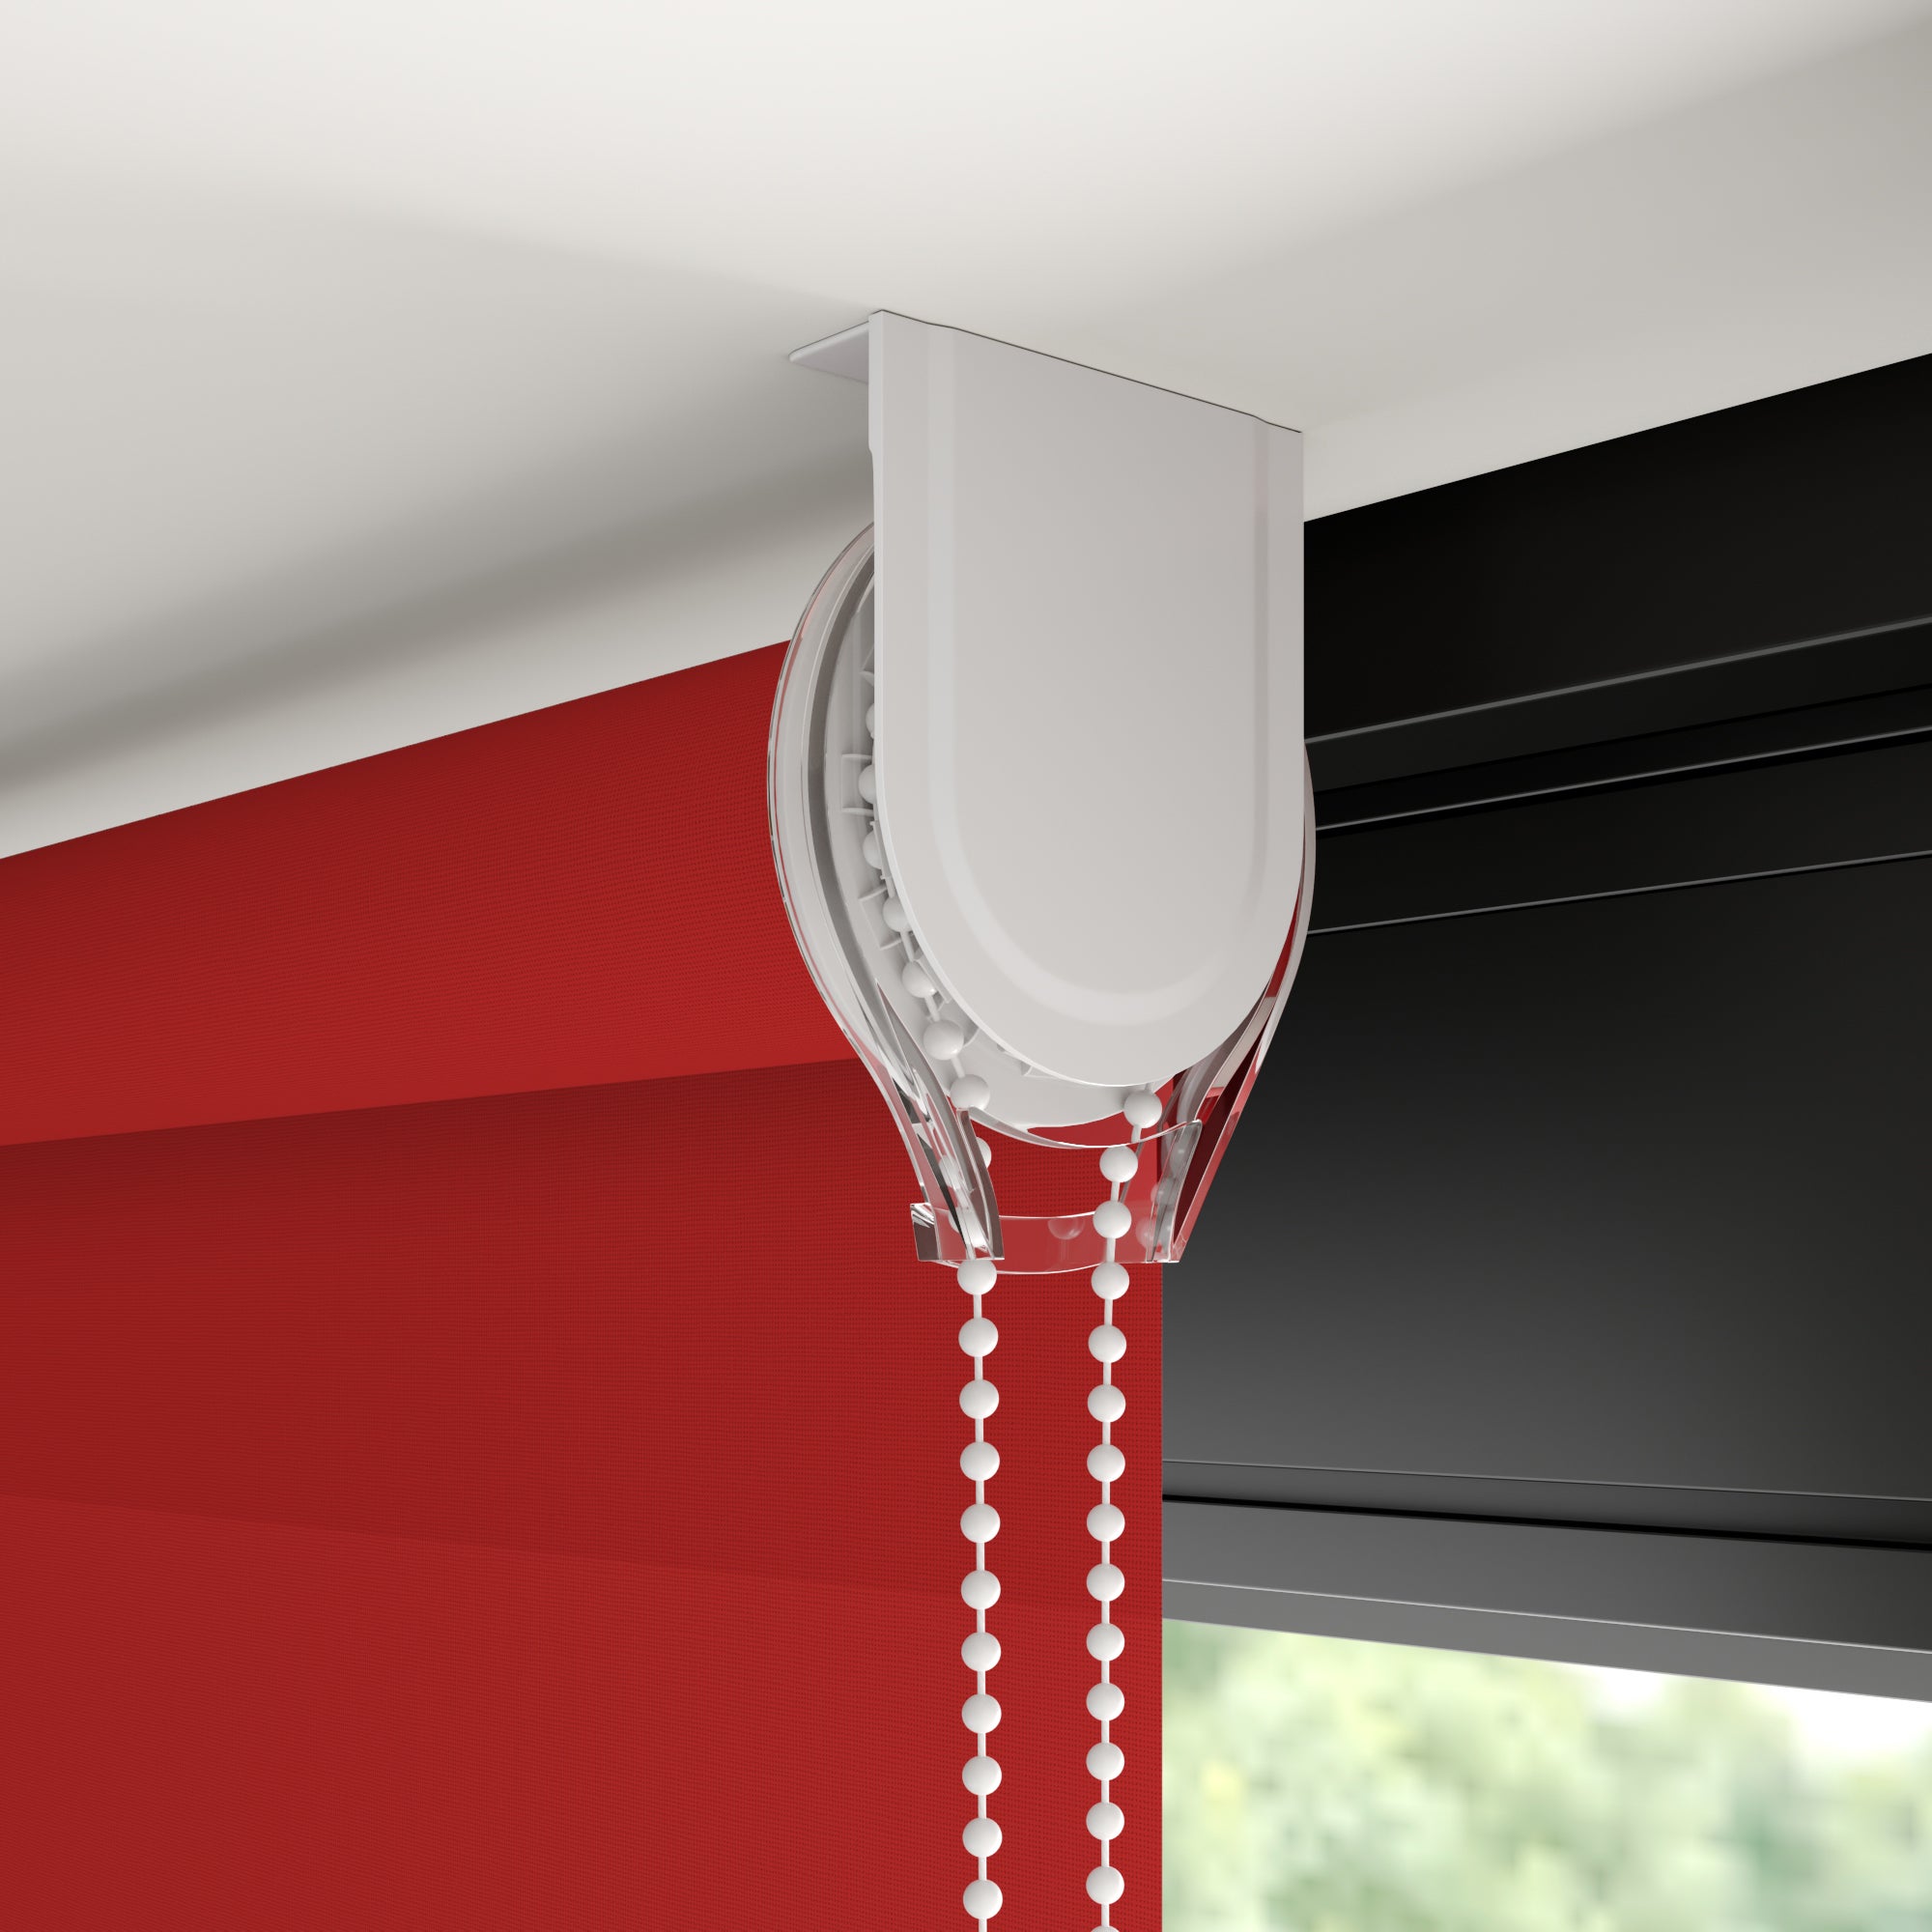 Twilight Daylight Made to Measure Roller Blind Twilight True Red